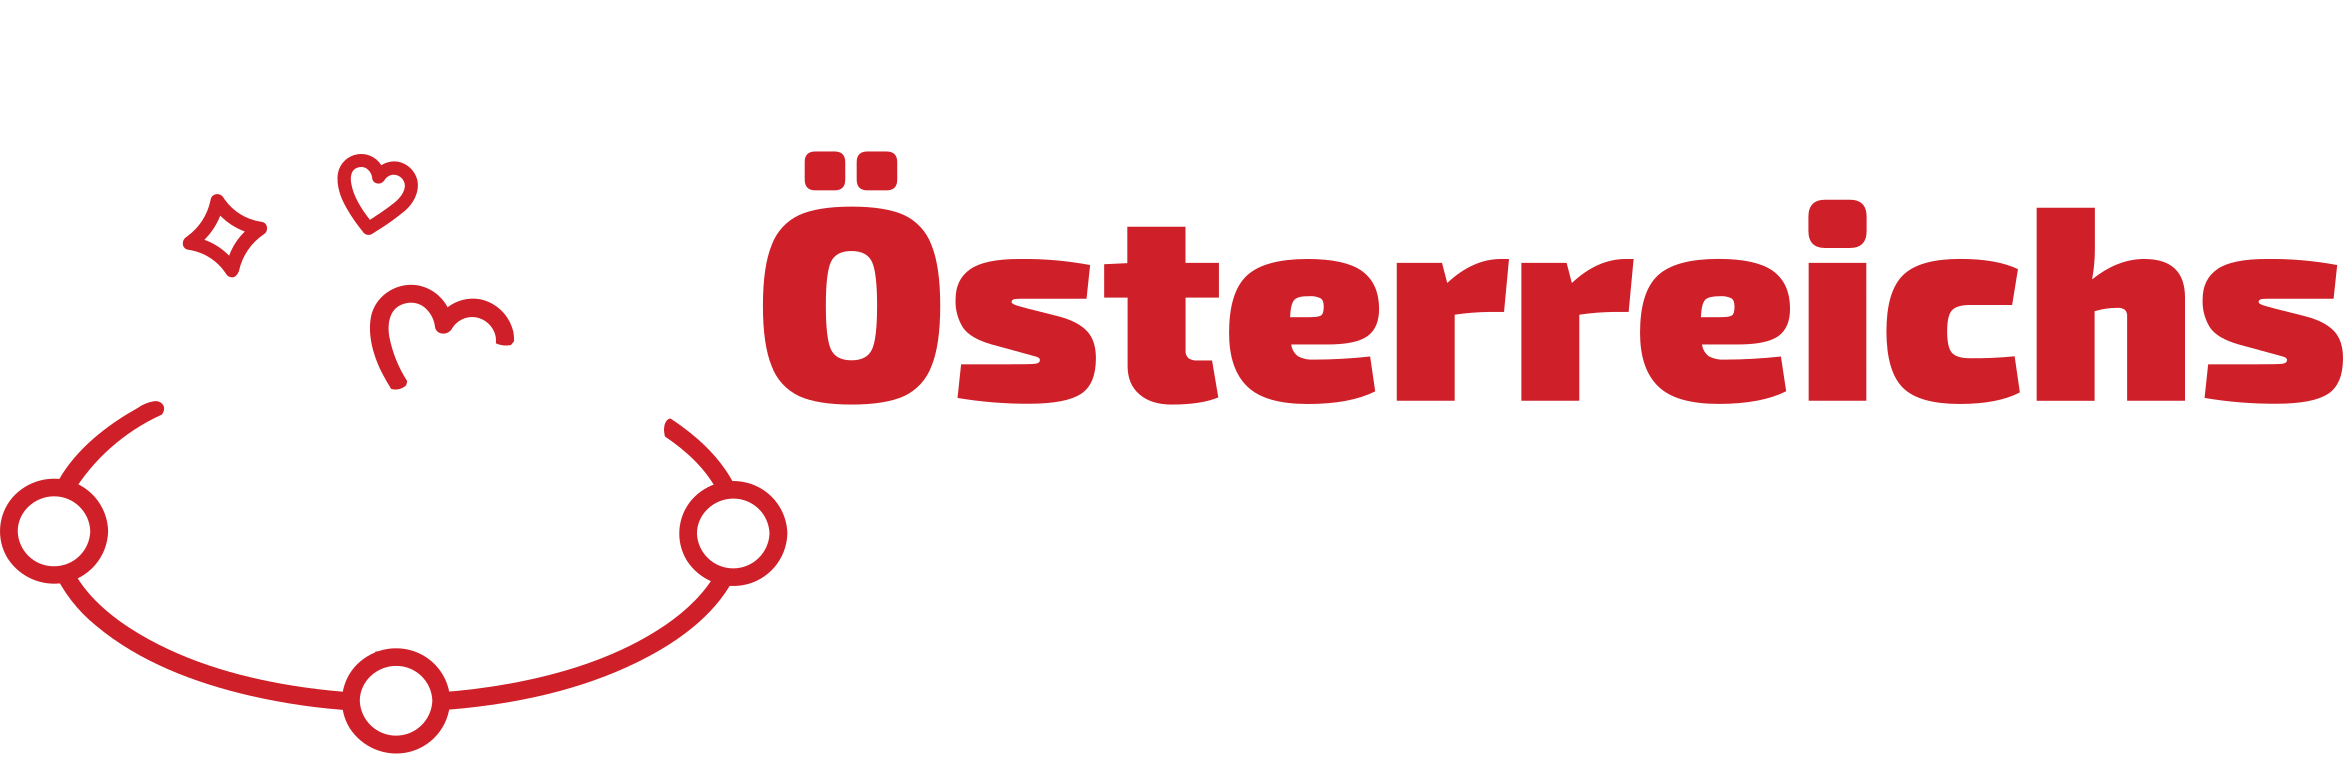 http://oesterreichonlinecasino.at/payment-methods/skrill/